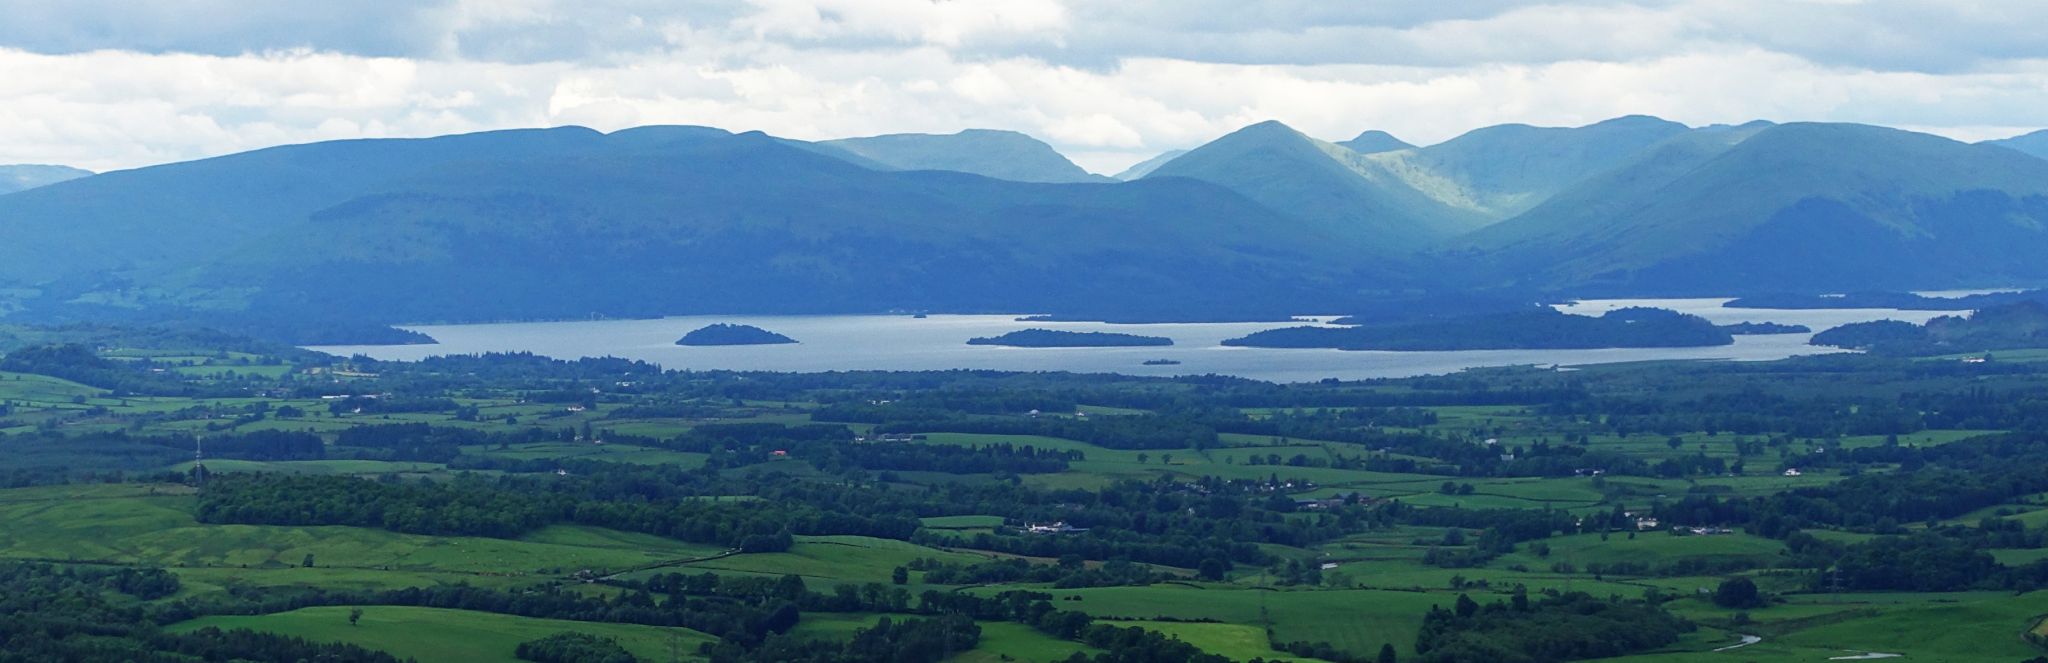 Luss Hills and Loch Lomond from cairn on traverse to Earl's Seat